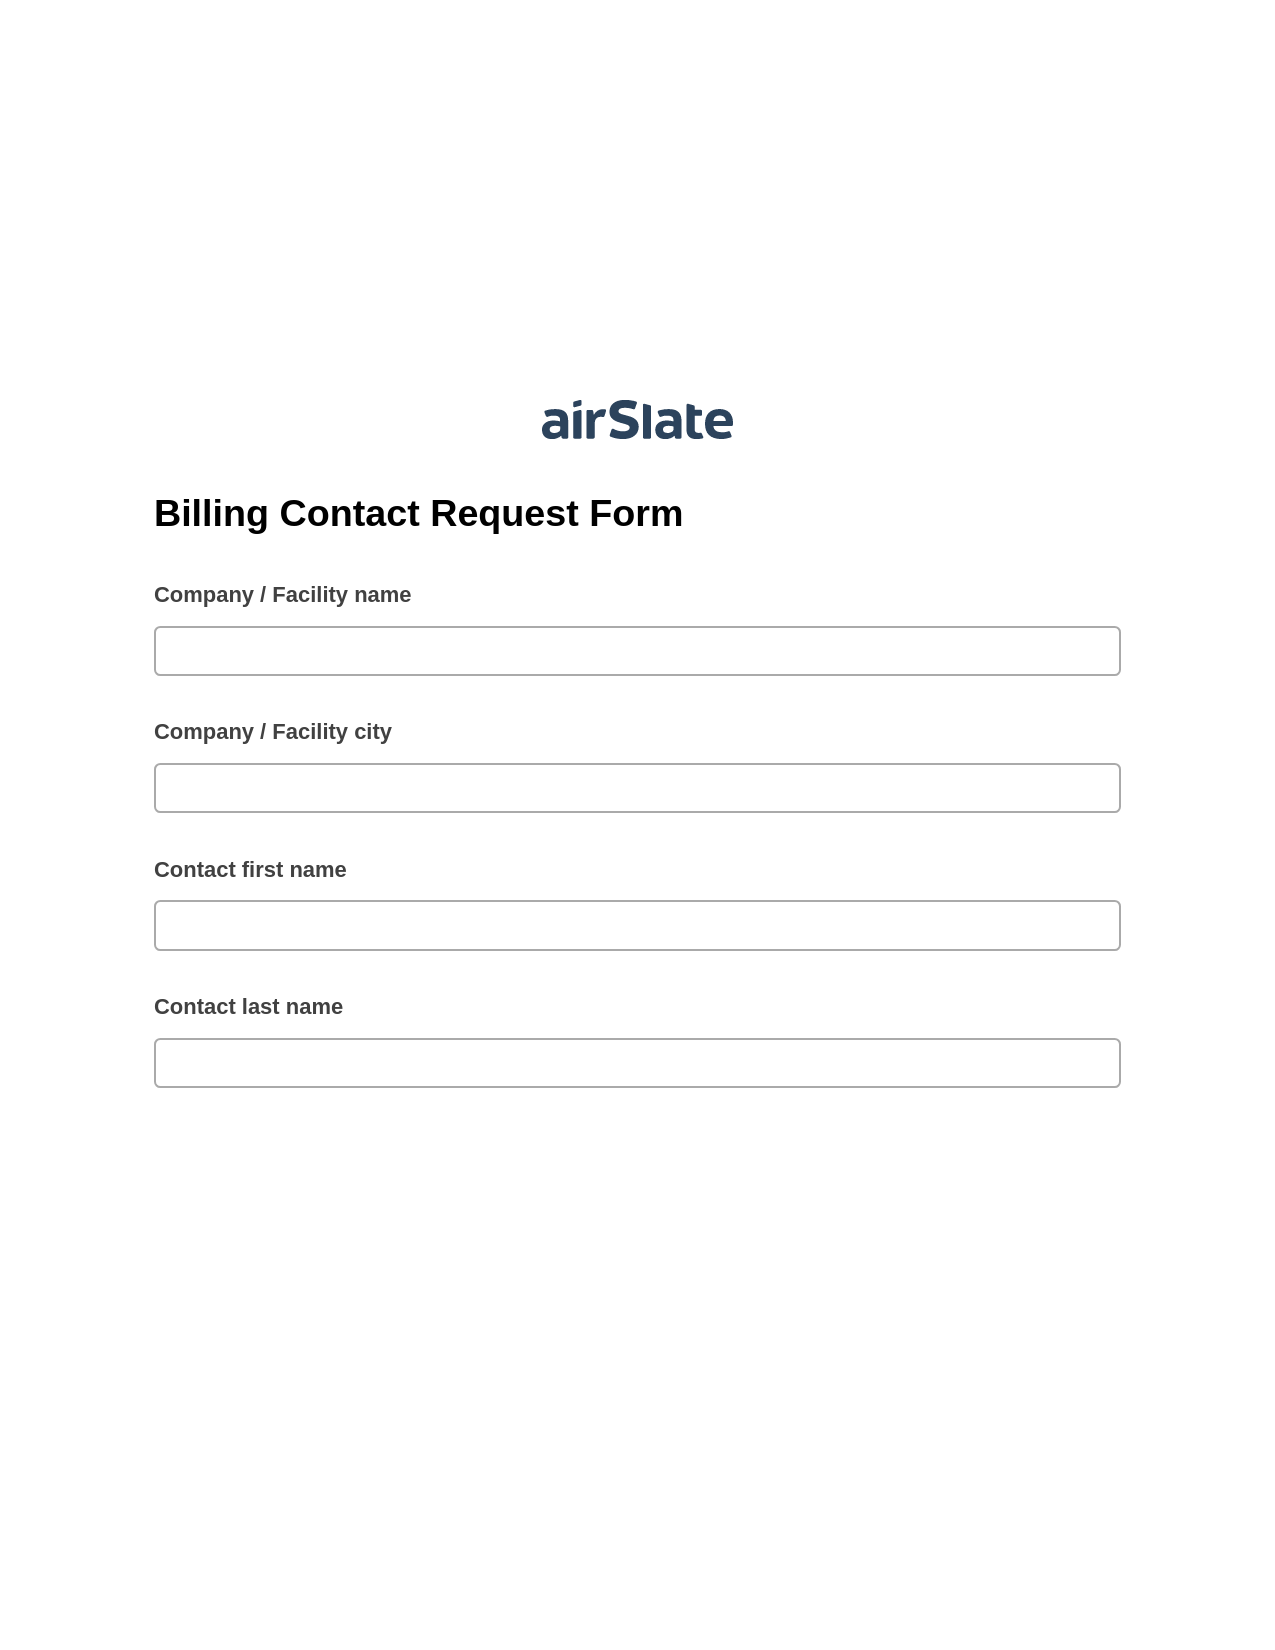 Multirole Billing Contact Request Form Pre-fill from NetSuite Records Bot, Assign Slate Name Bot, Export to NetSuite Record Bot